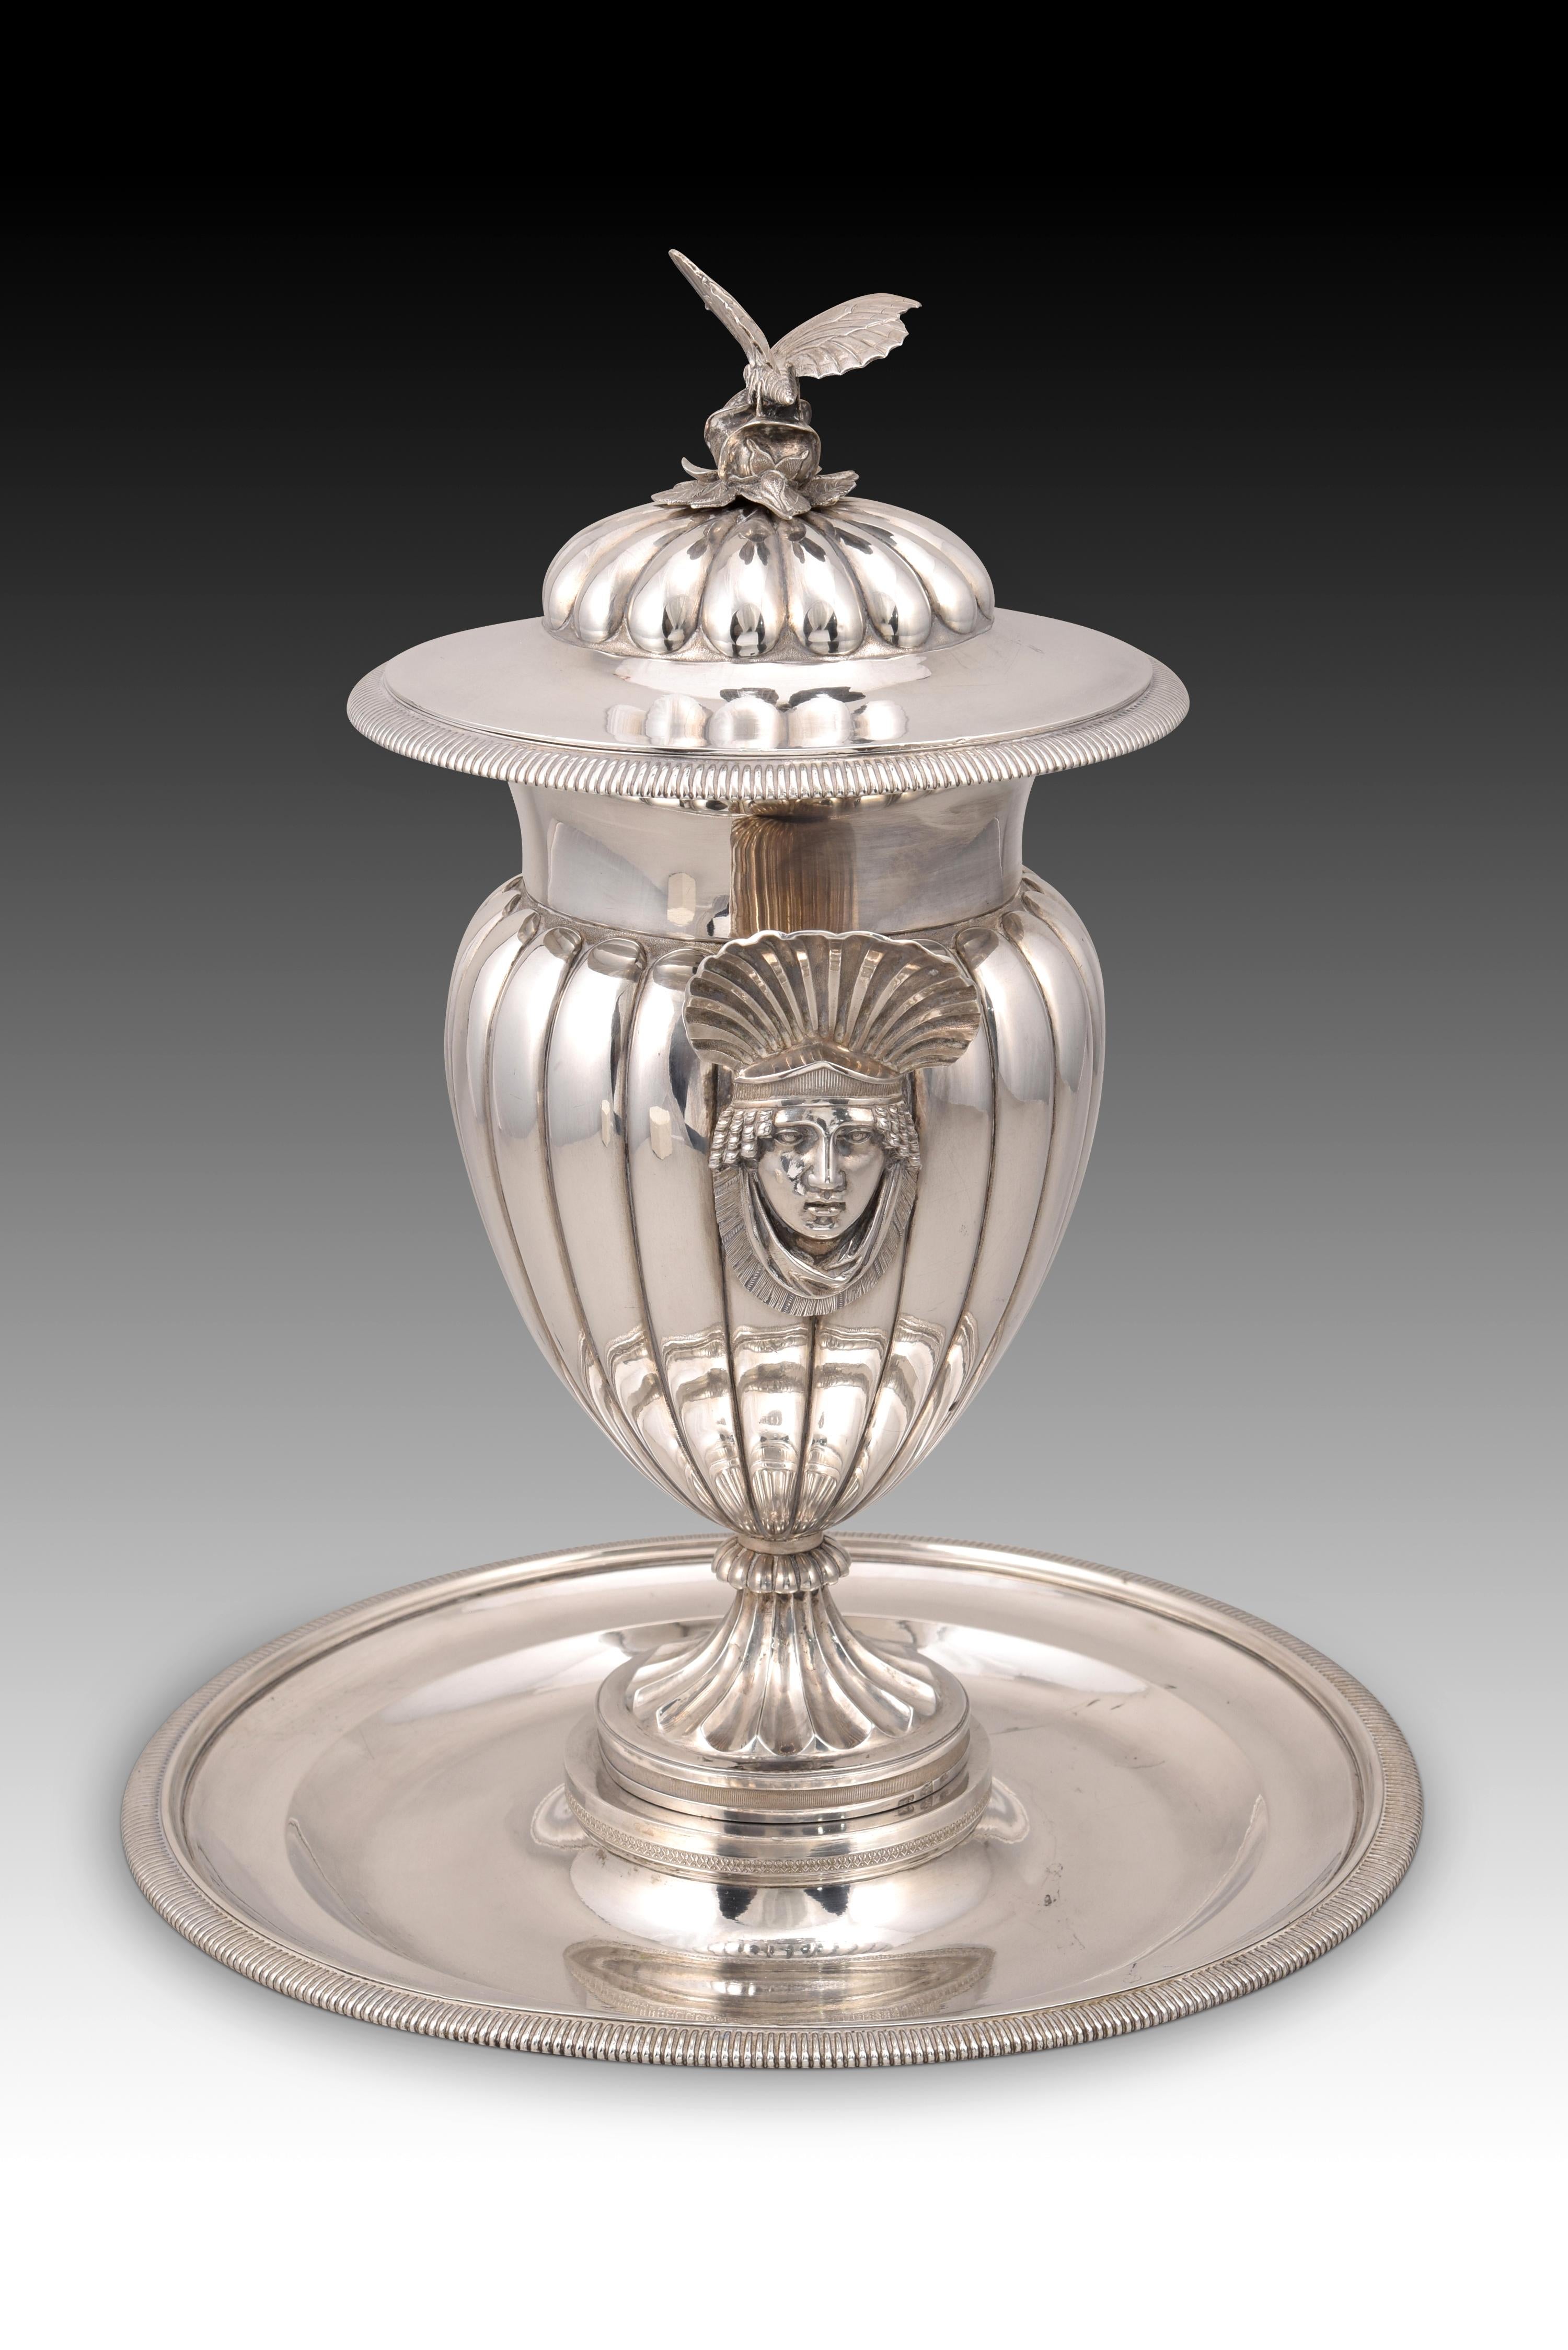 Neoclassical Cup with tray. Royal Silver Factory of Antonio Martínez. Madrid, Spain, 1830s. For Sale